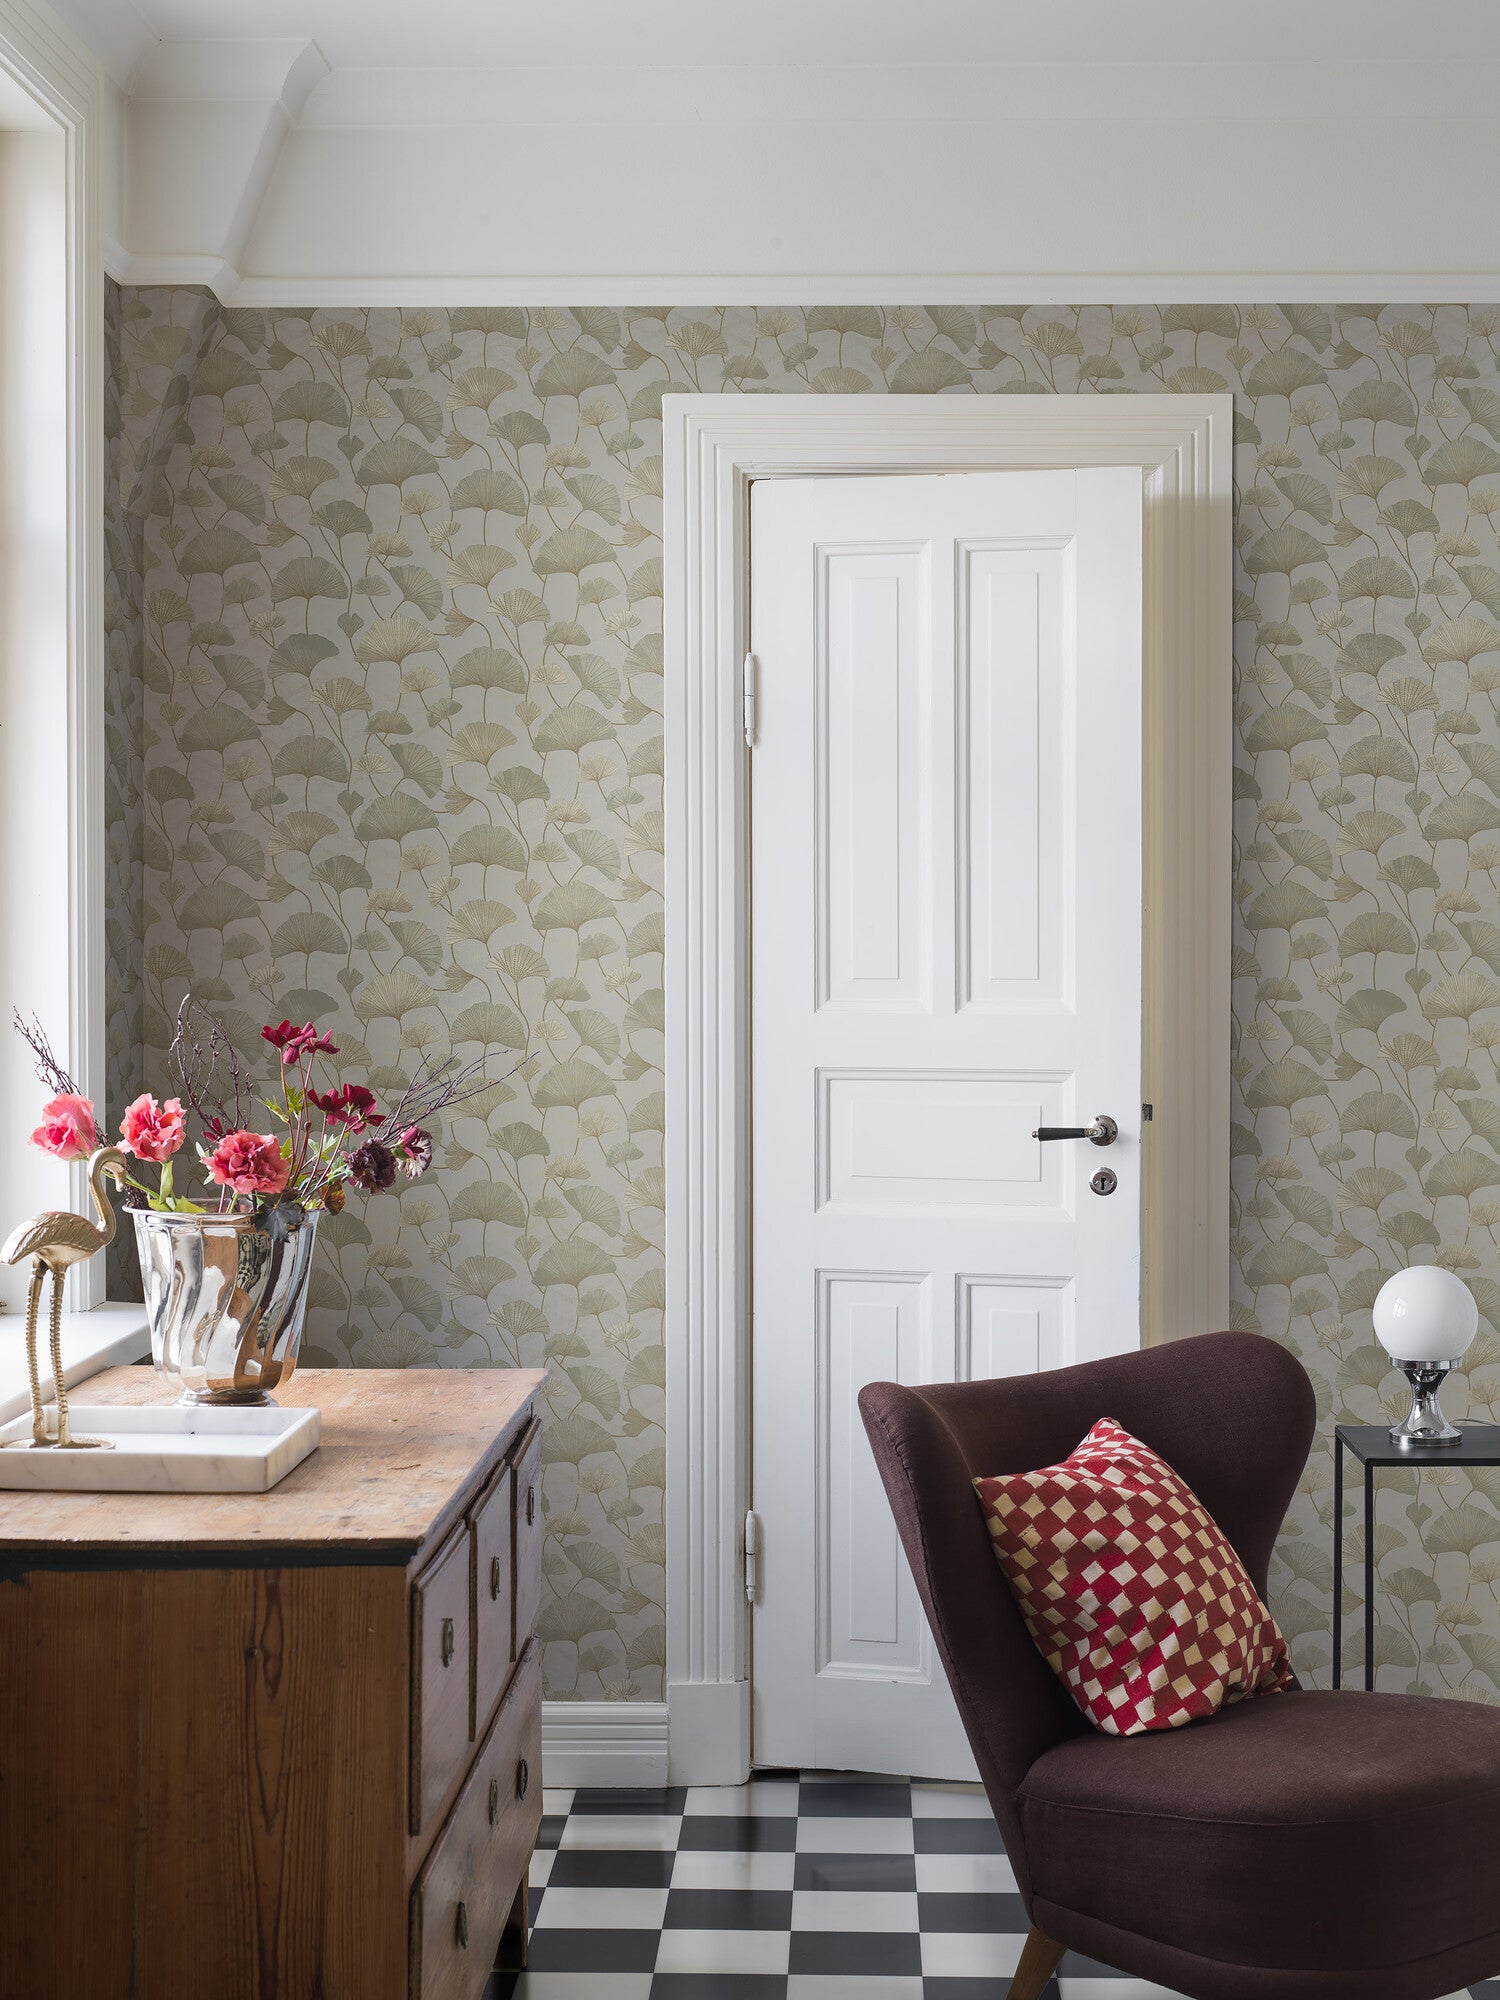 Colored in a cool green and beige palette with a golden shimmer effect, our Sophia wallpaper imbues rooms with soothing vibes. 